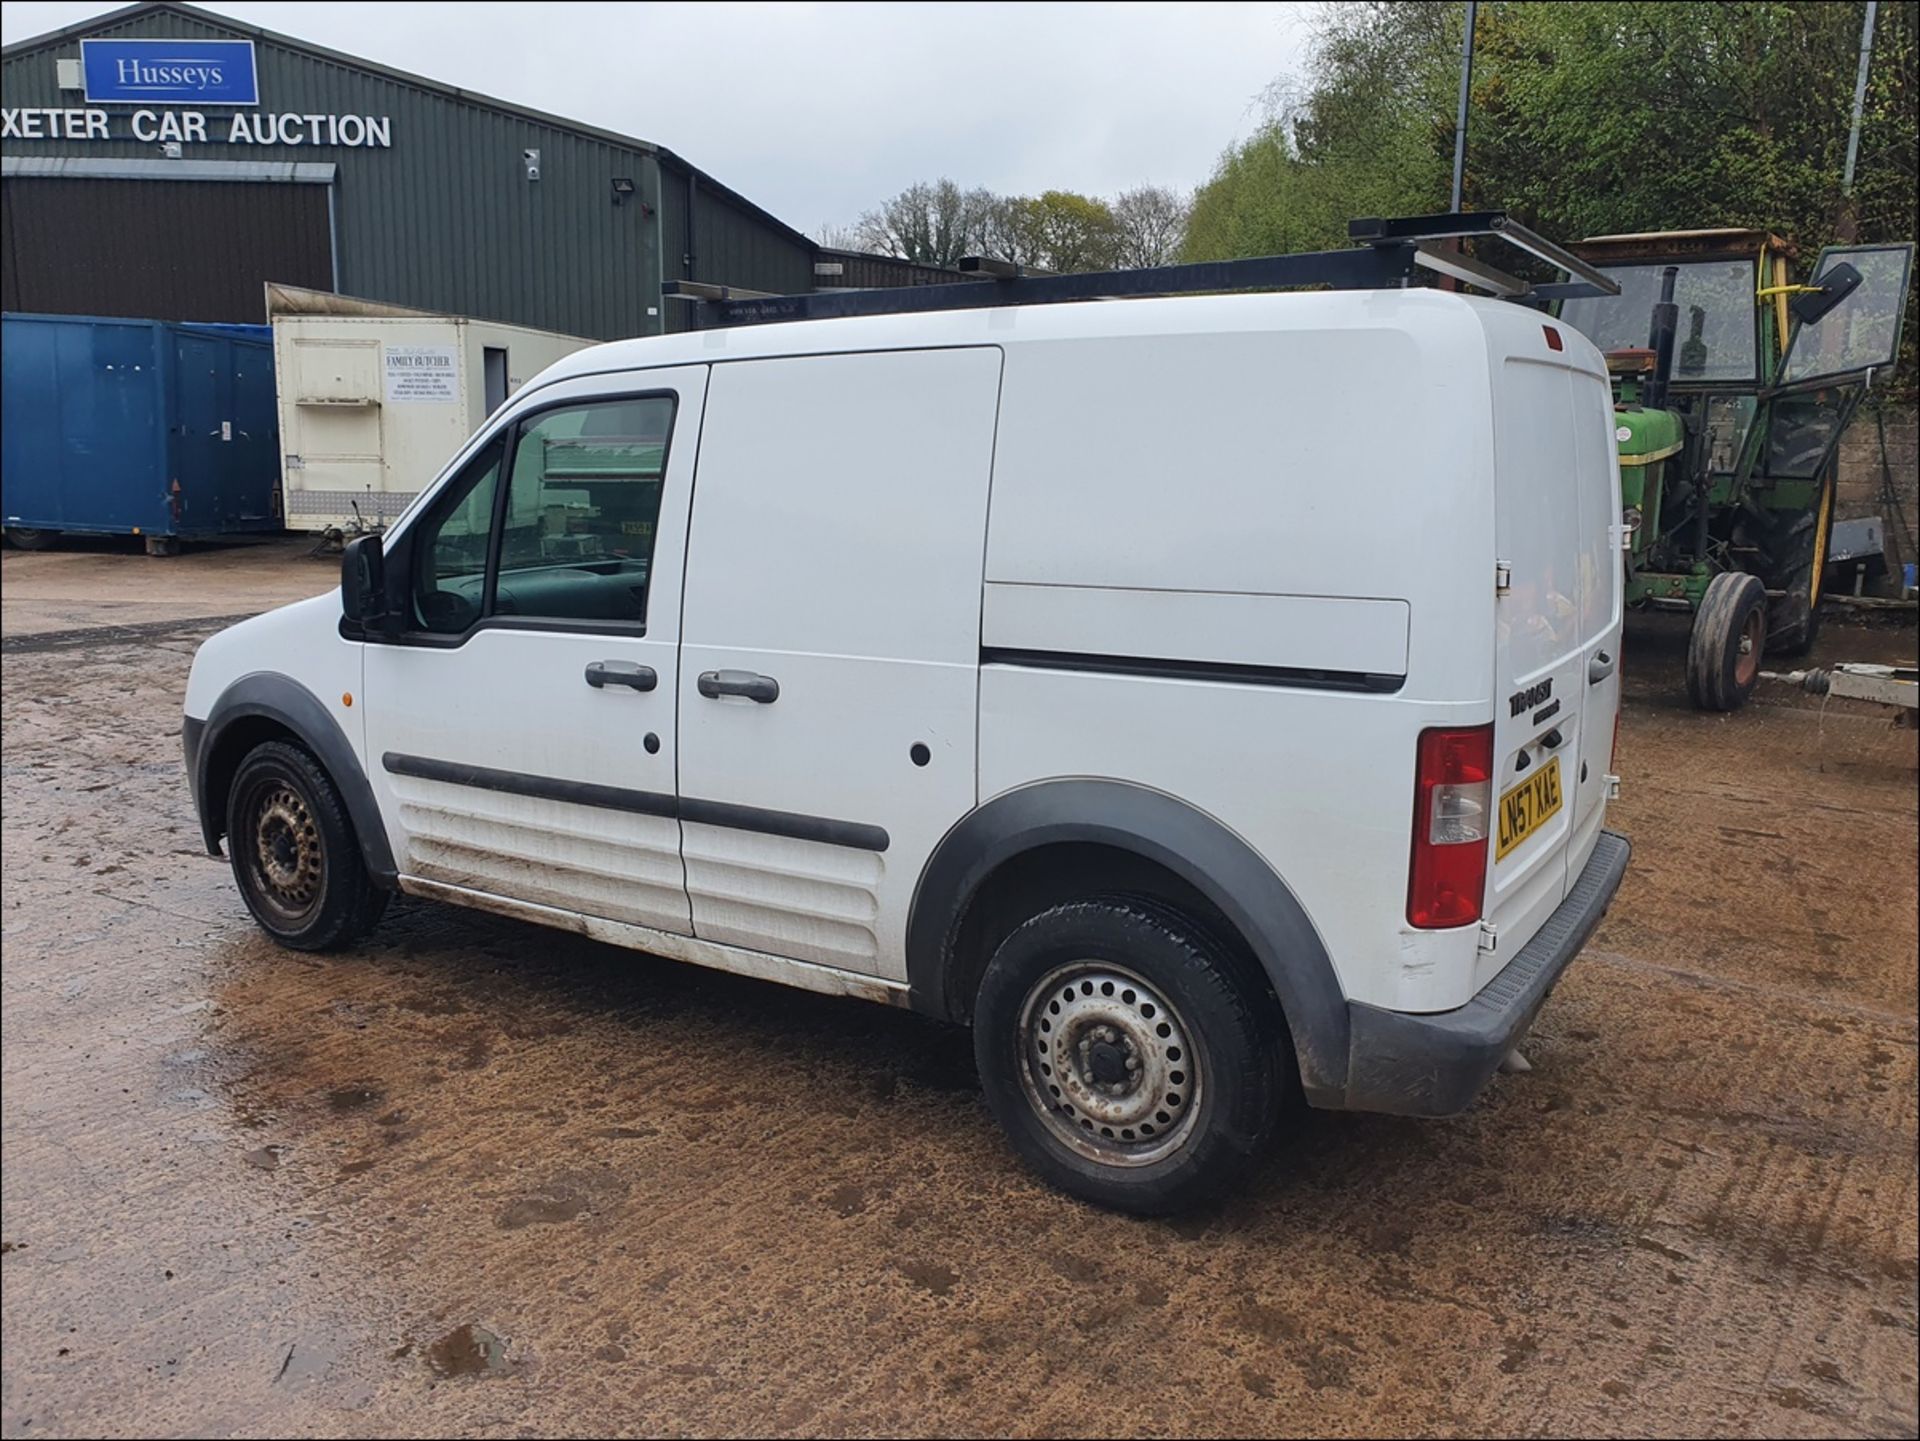 07/57 FORD TRANSIT CONNECT T200 L75 - 1753cc 5dr Van (White) - Image 11 of 12